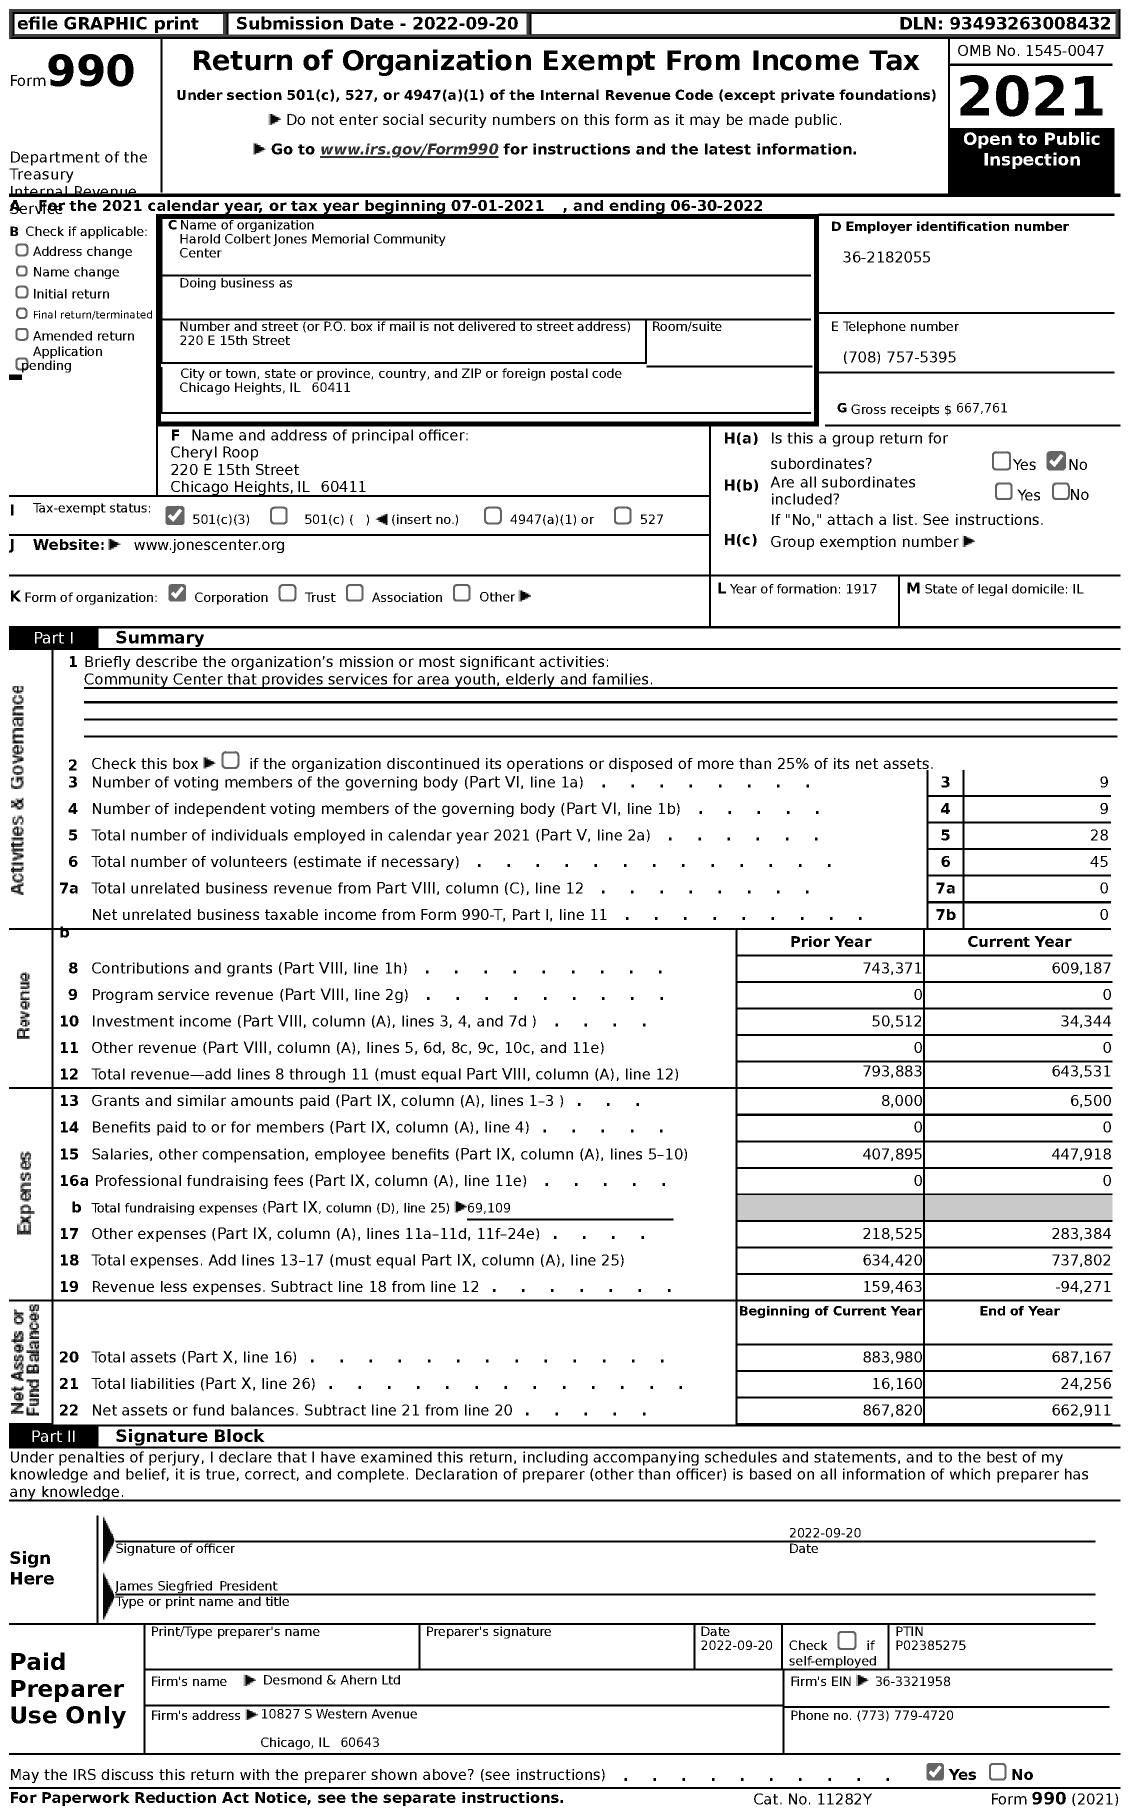 Image of first page of 2021 Form 990 for Harold Colbert Jones Memorial Community Center